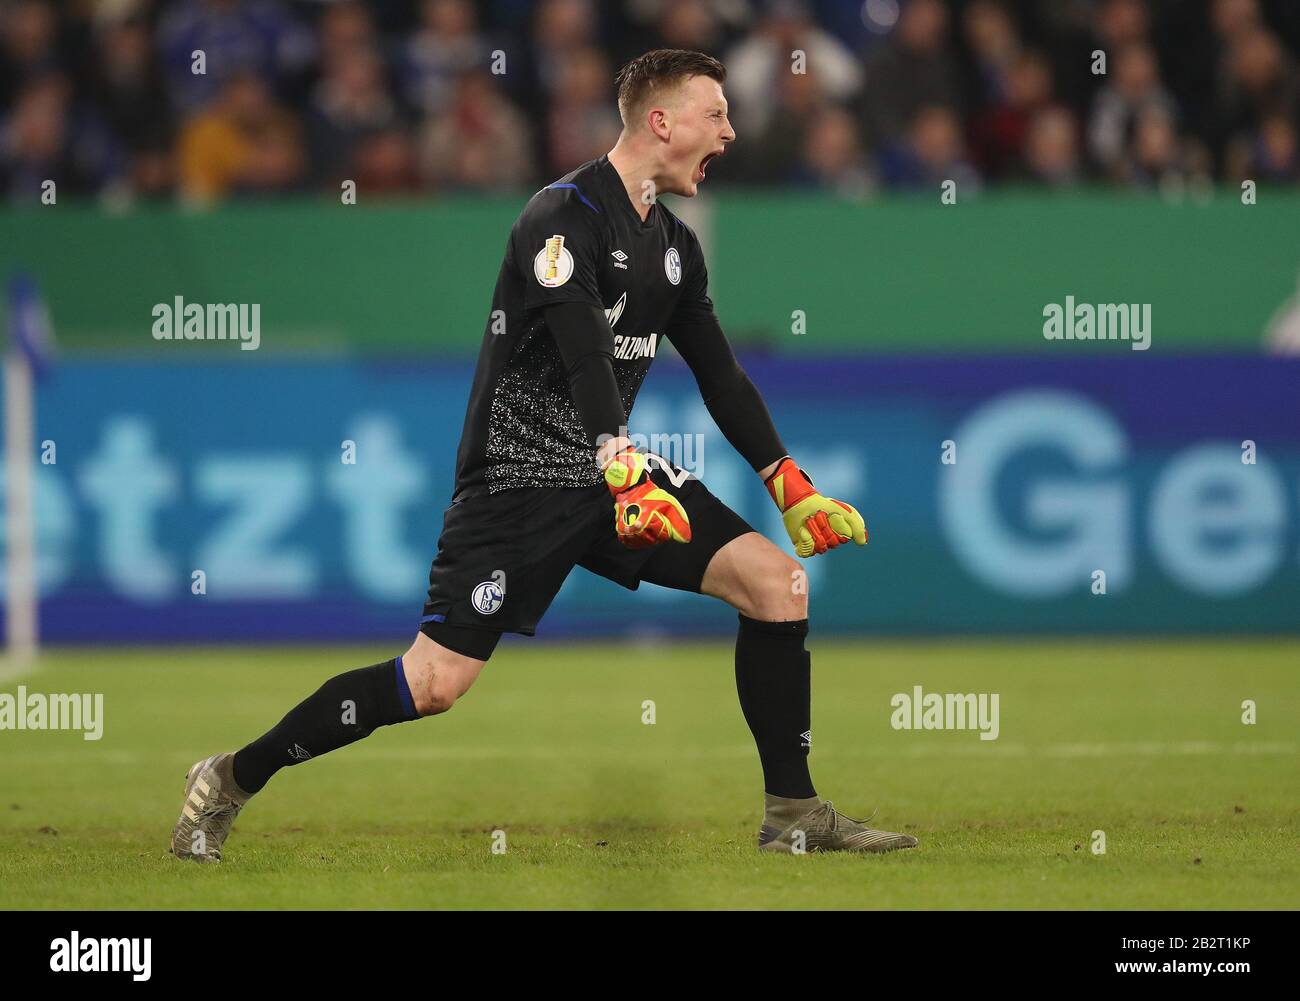 Fc schalke 04 fc bayern munich hi-res stock photography and images - Alamy